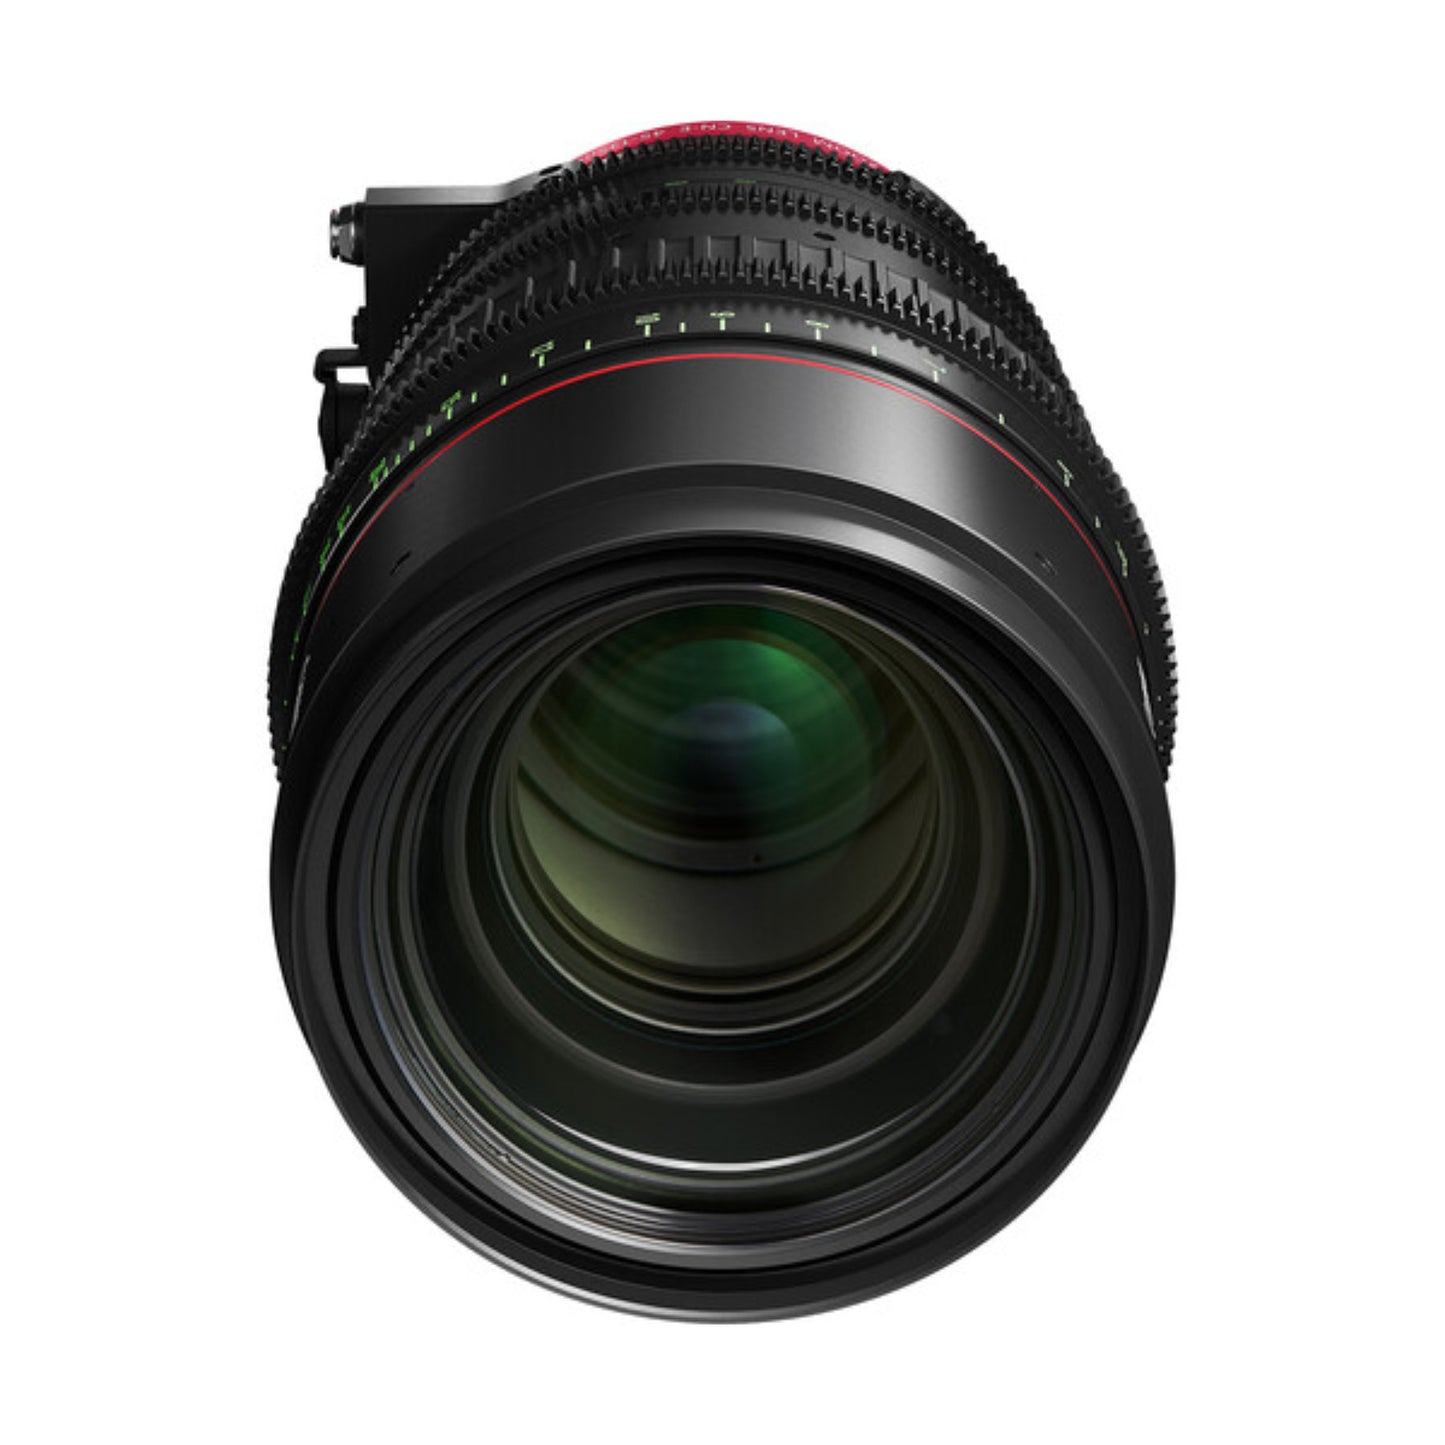 Buy Canon CN-E 45-135mm T2.4 LF Cinema EOS Zoom Lens (PL Mount) at Topic Store